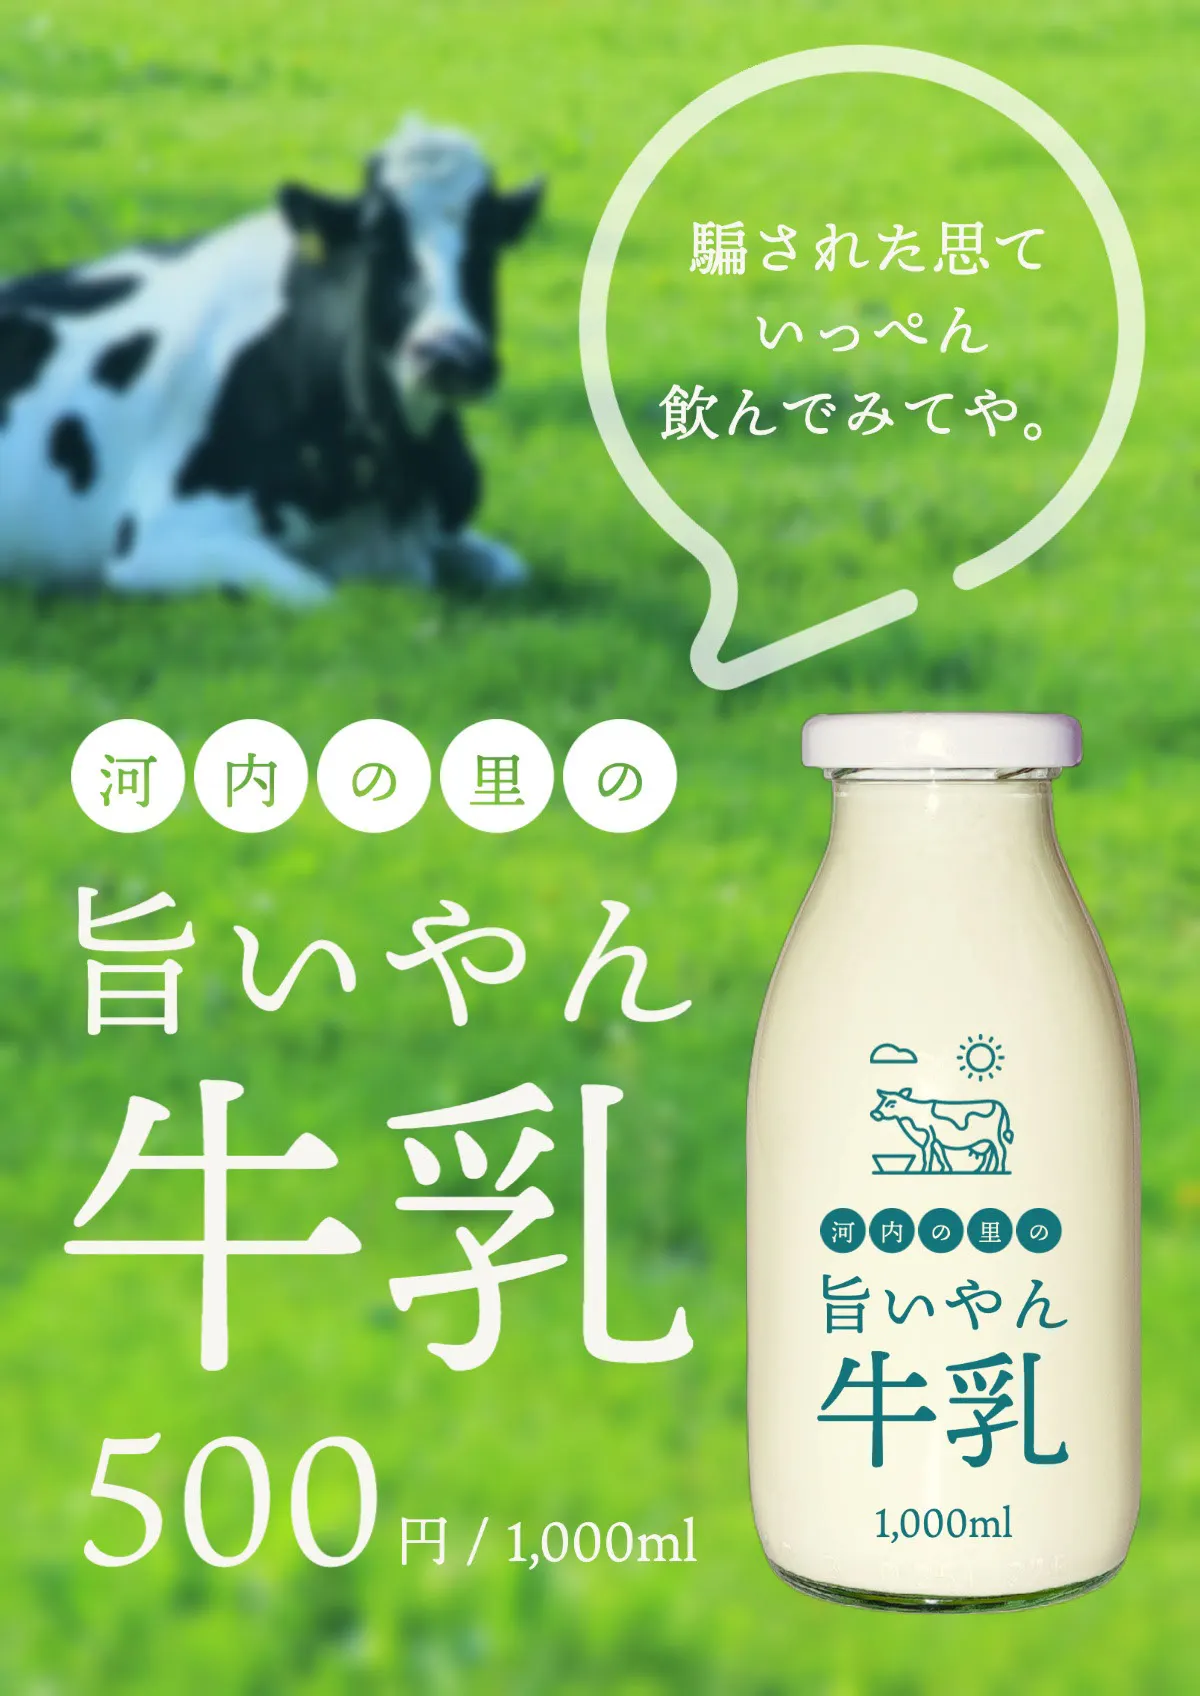 promotion of milk poster